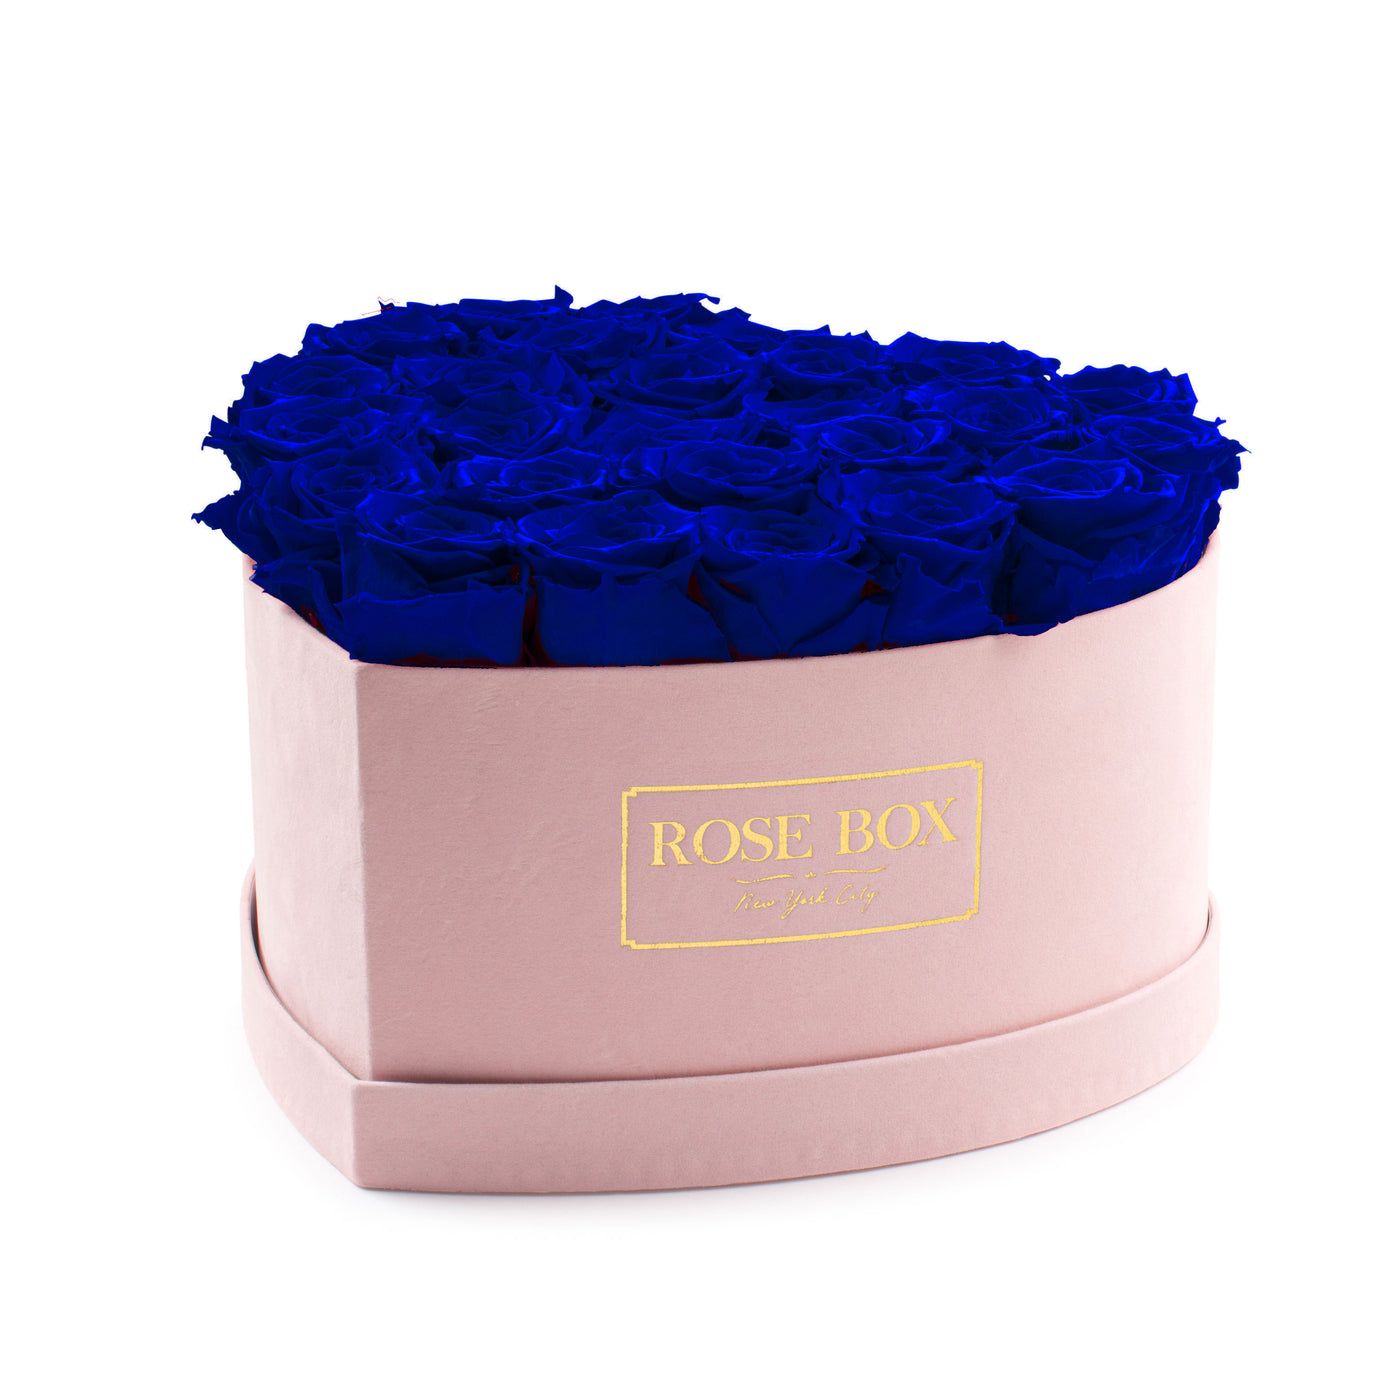 Large Pink Heart Box with Night Blue Roses